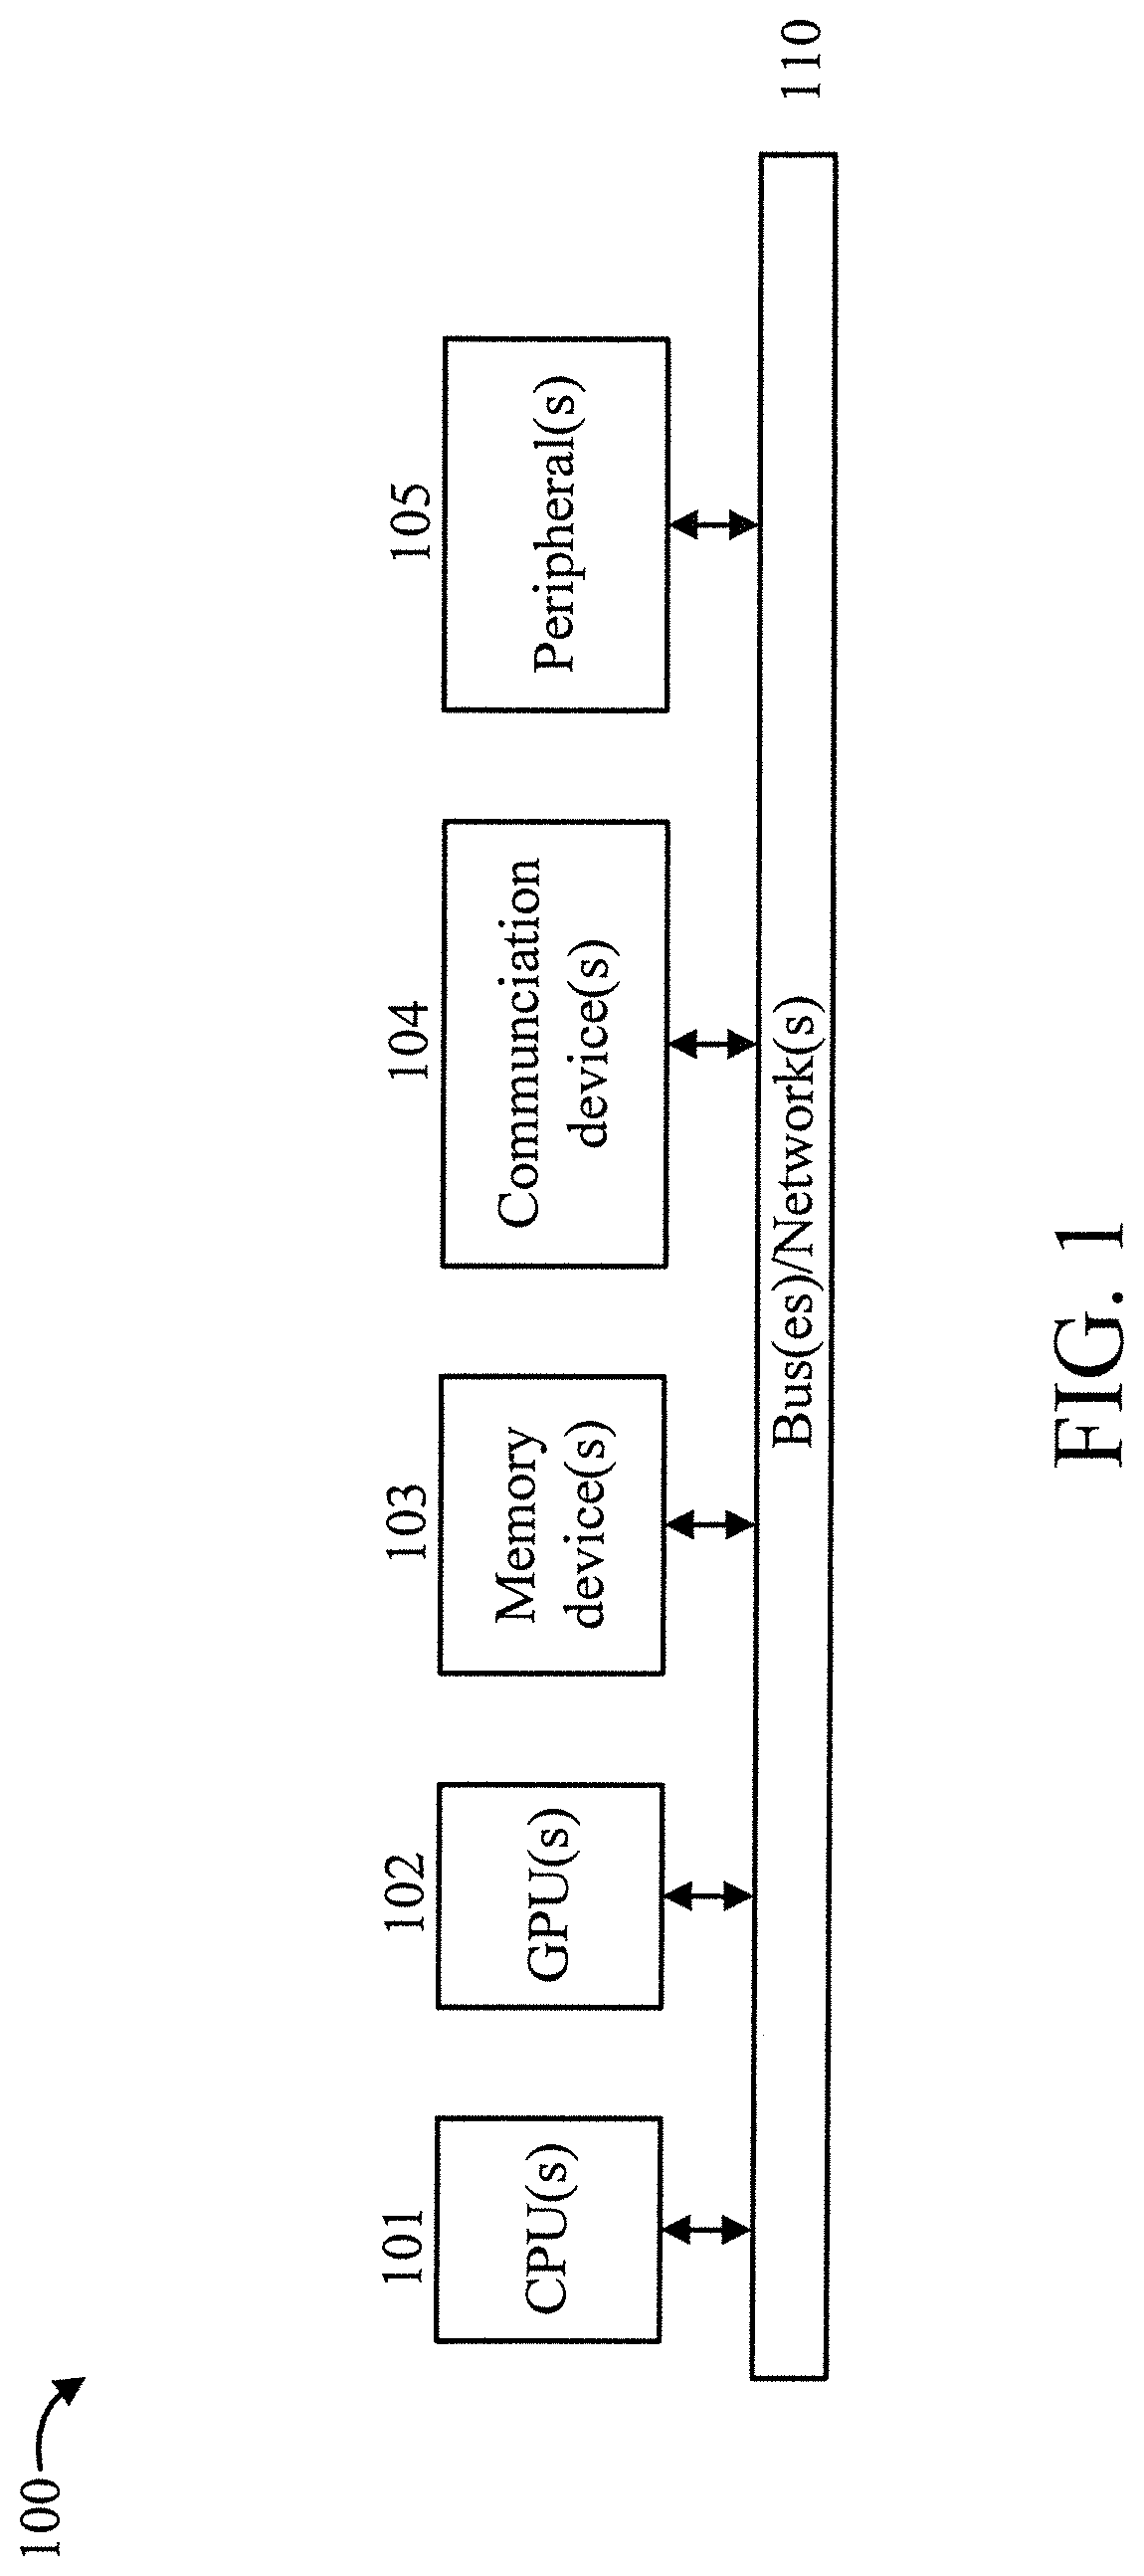 Feature and feature variant reconstruction for recurrent model accuracy improvement in speech recognition